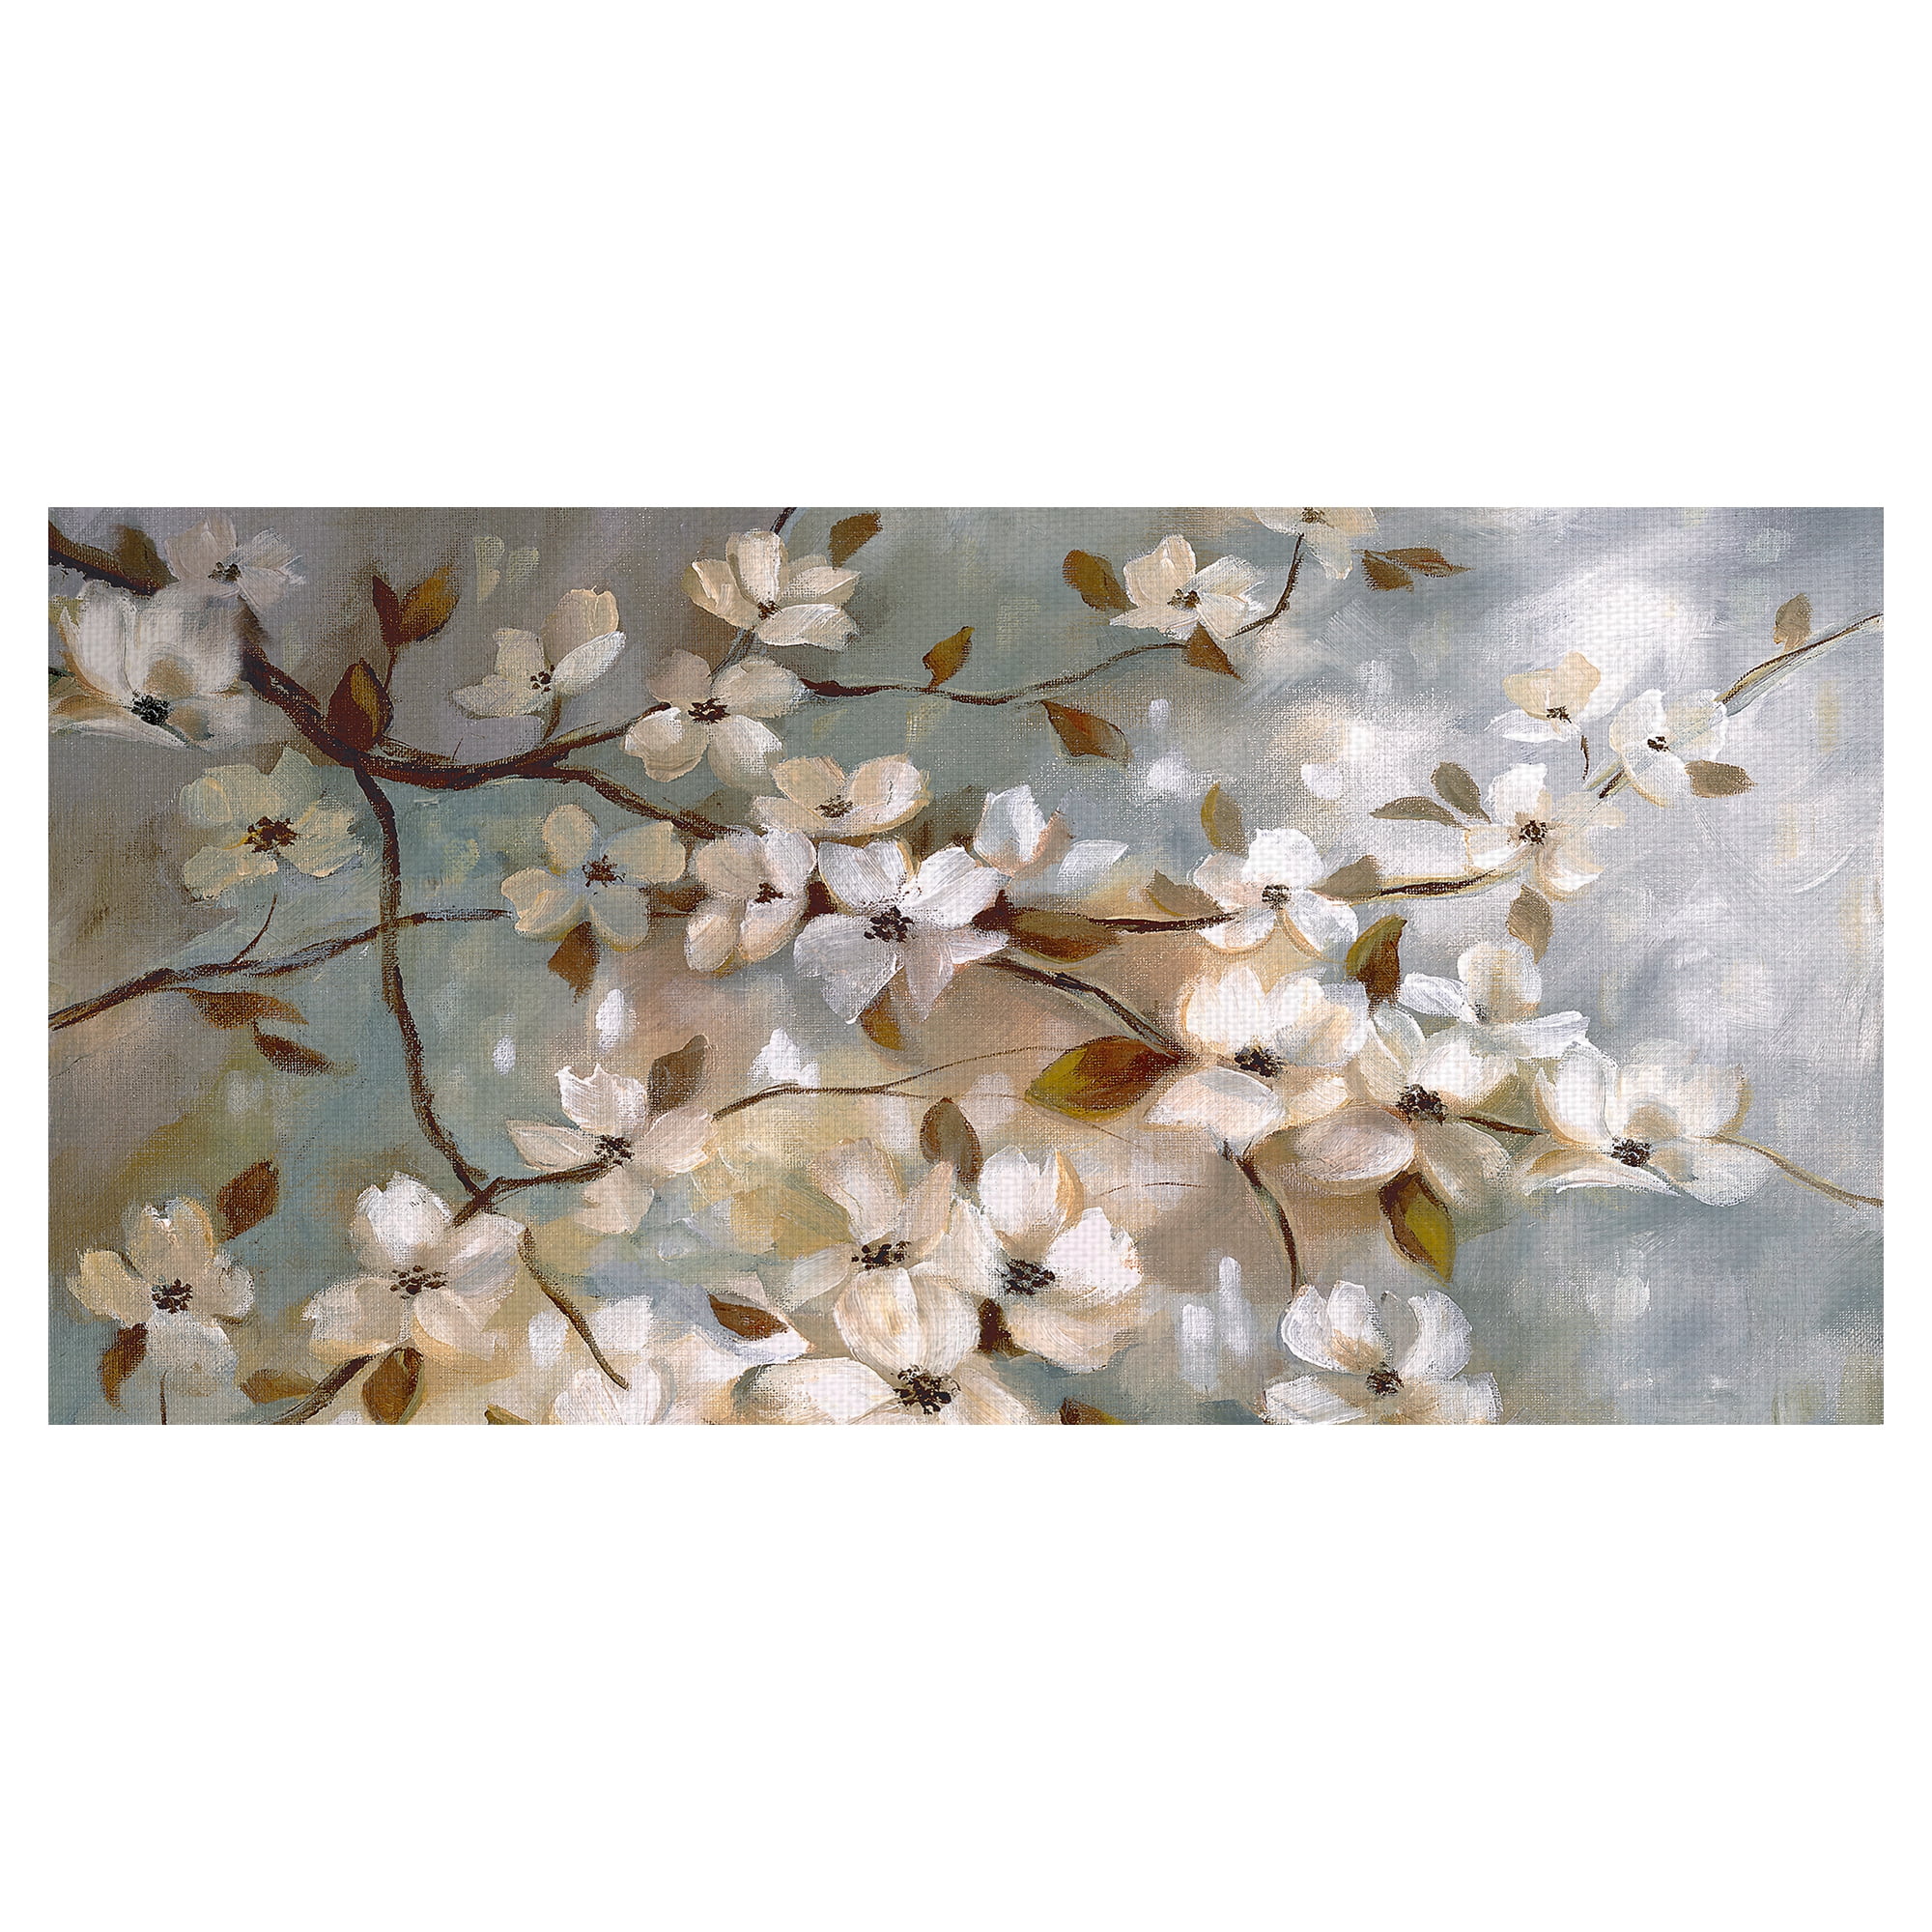 Masterpiece Art Gallery Blossoms Of May Panel By Nan Canvas Art Print ...